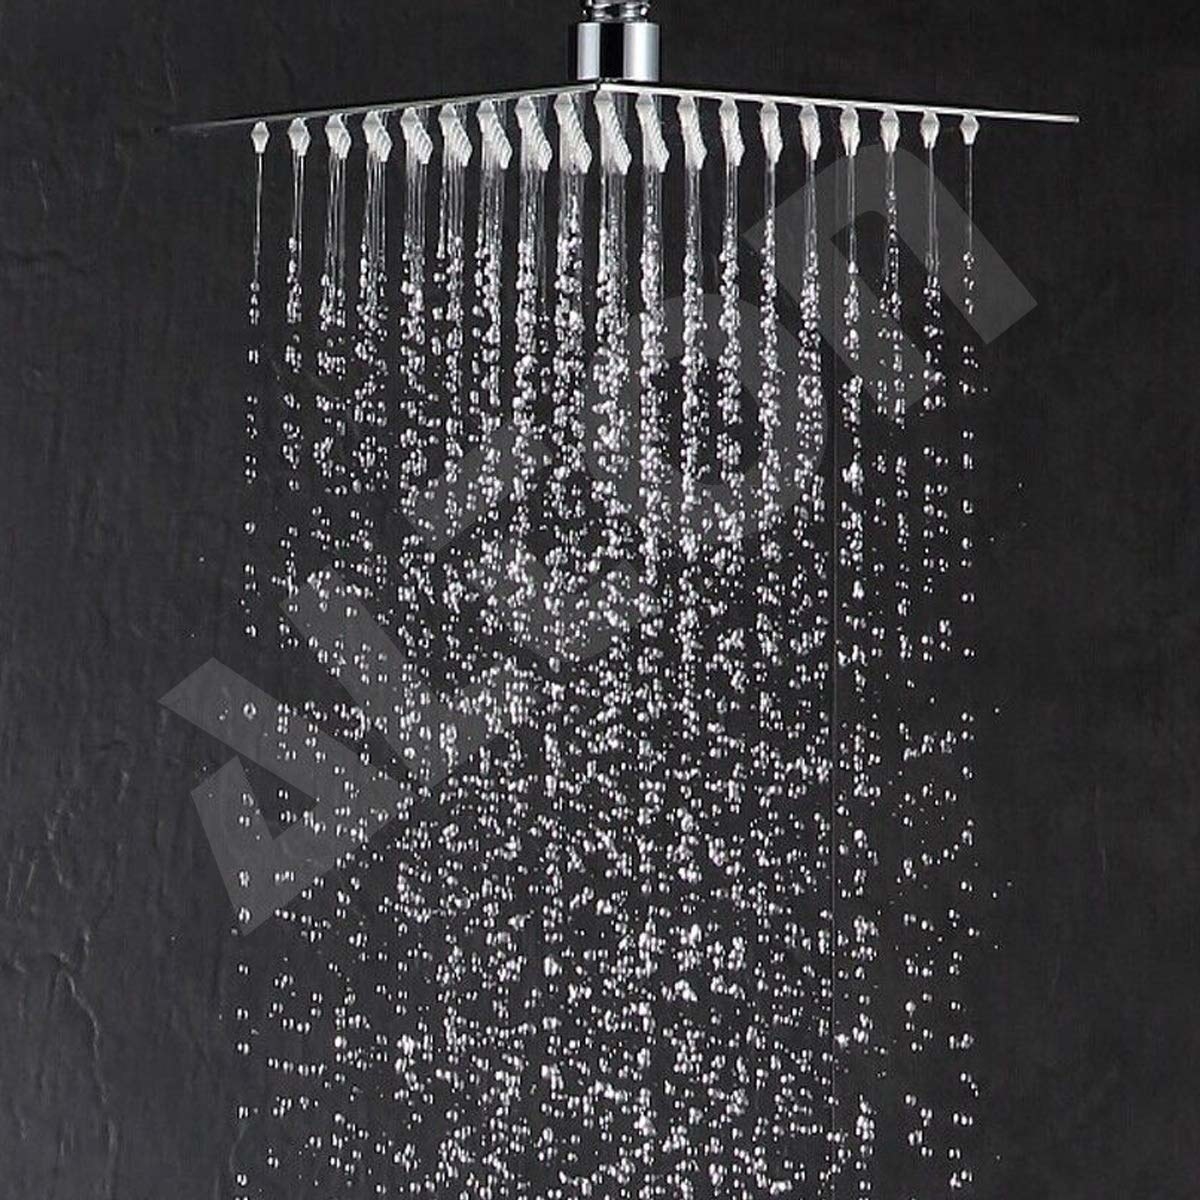 A showerhead with water pouring out of it